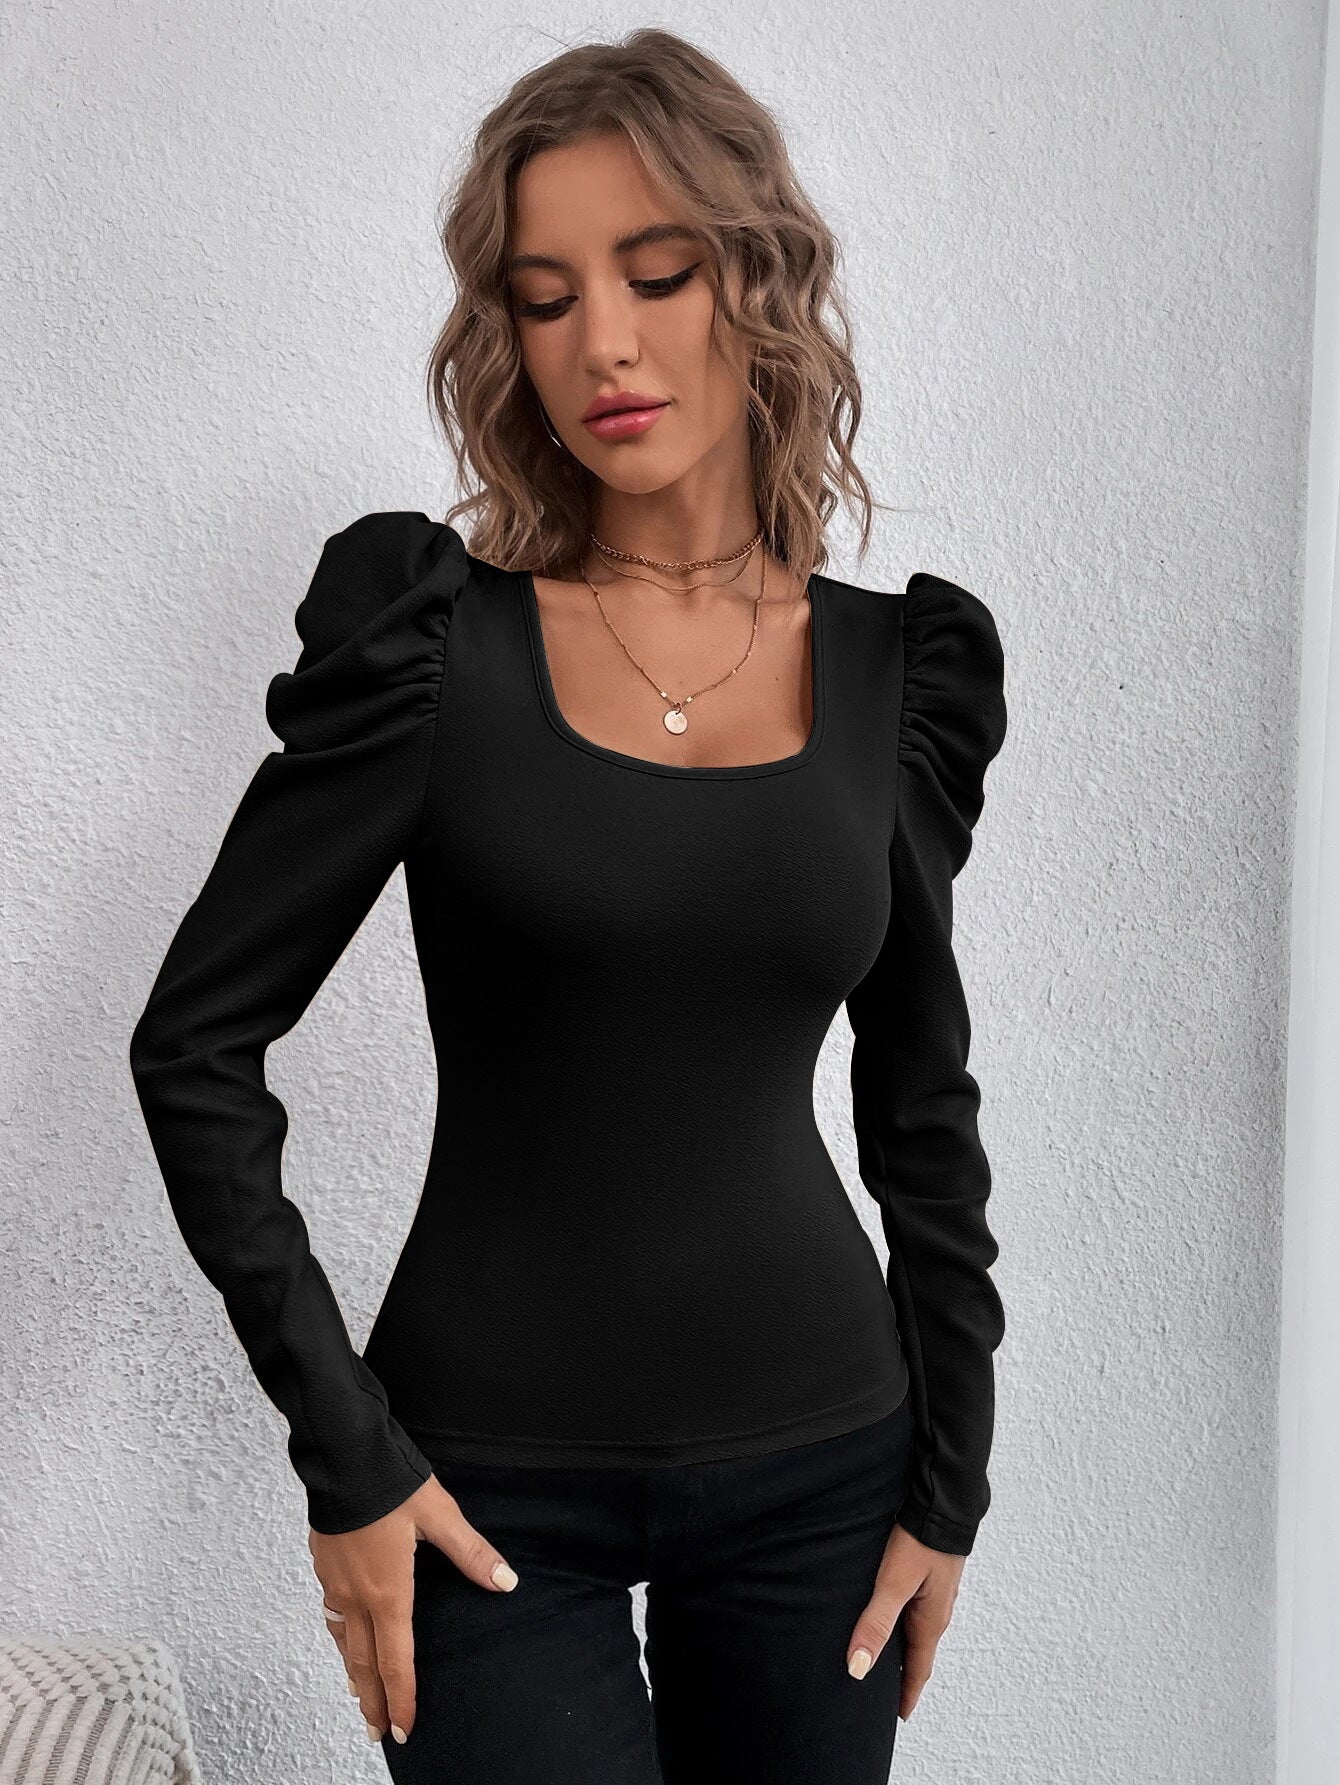 Women's Fashion Square Collar Slim-fit Knitted Long-sleeved T-shirt